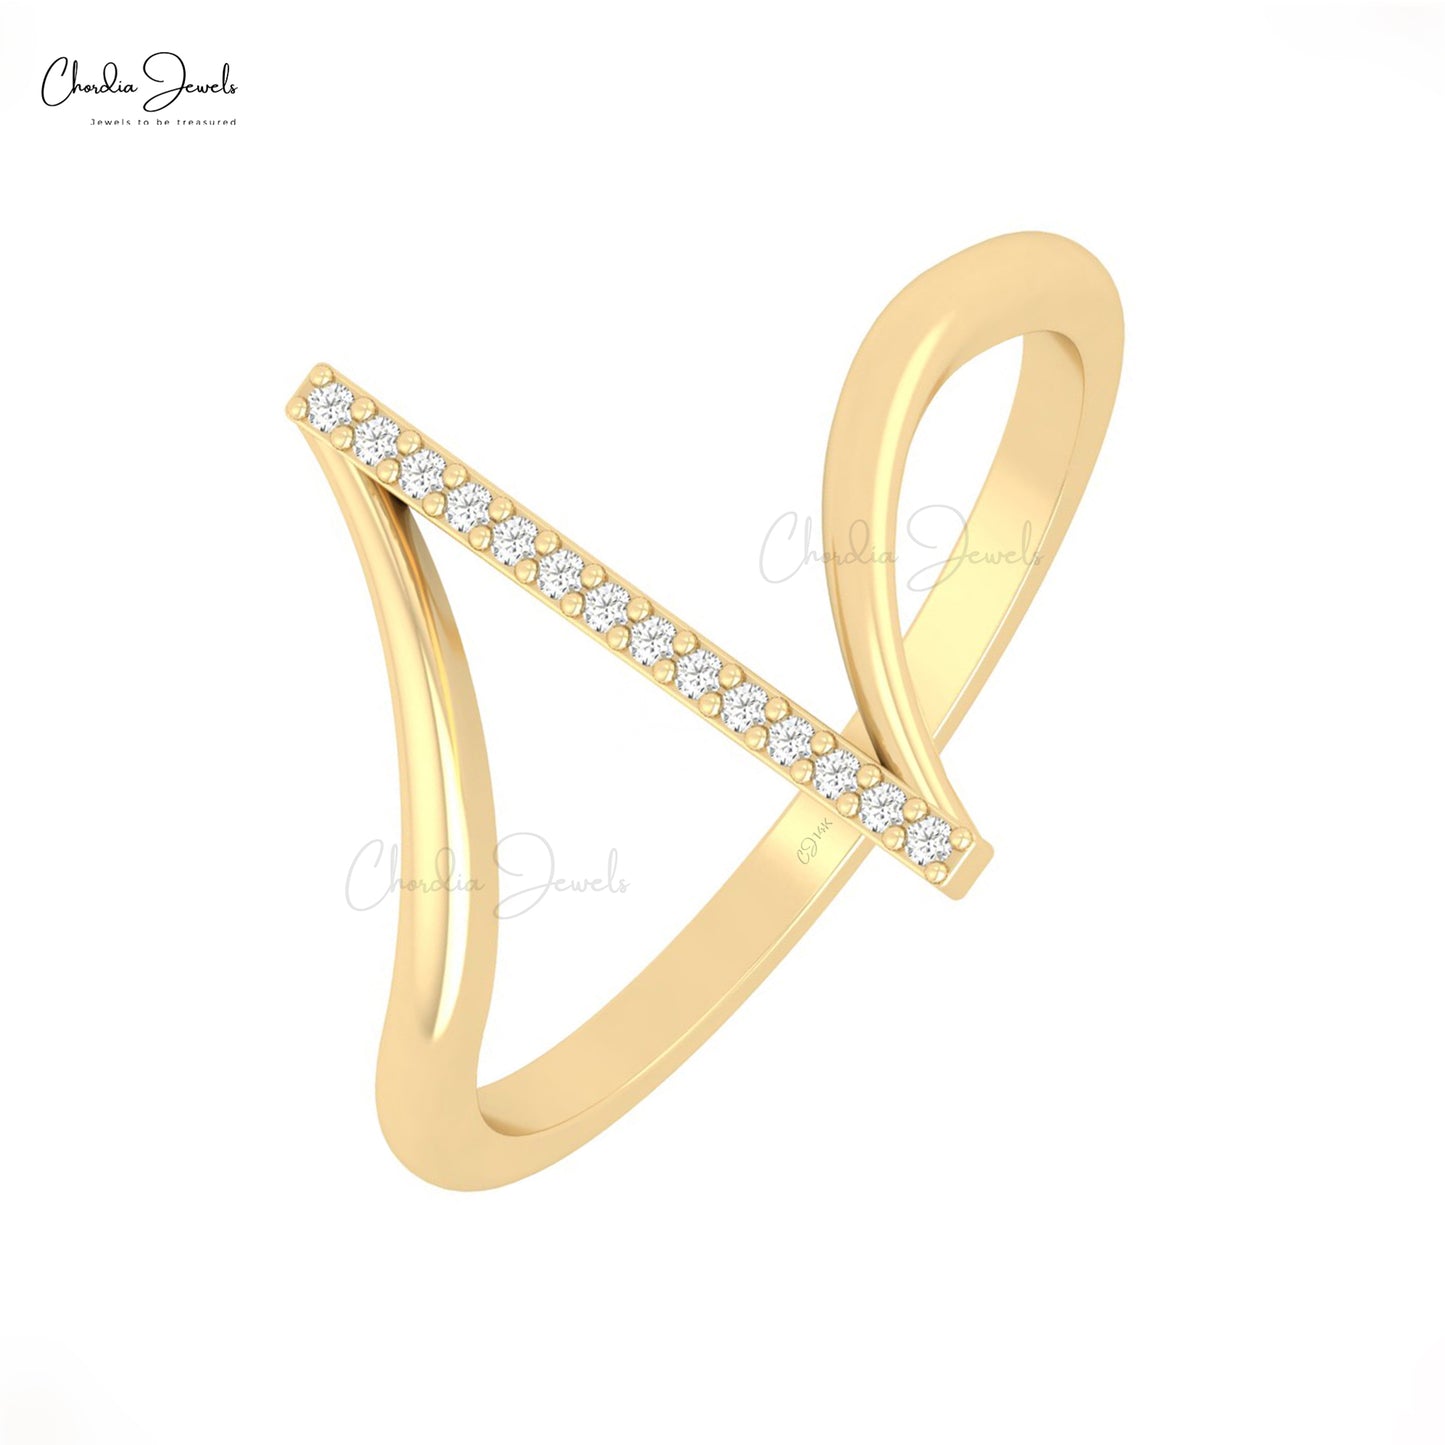 Genuine White Diamond Bar Ring in 14k Solid Gold Delicate Round-Cut Diamond Ring For Gift